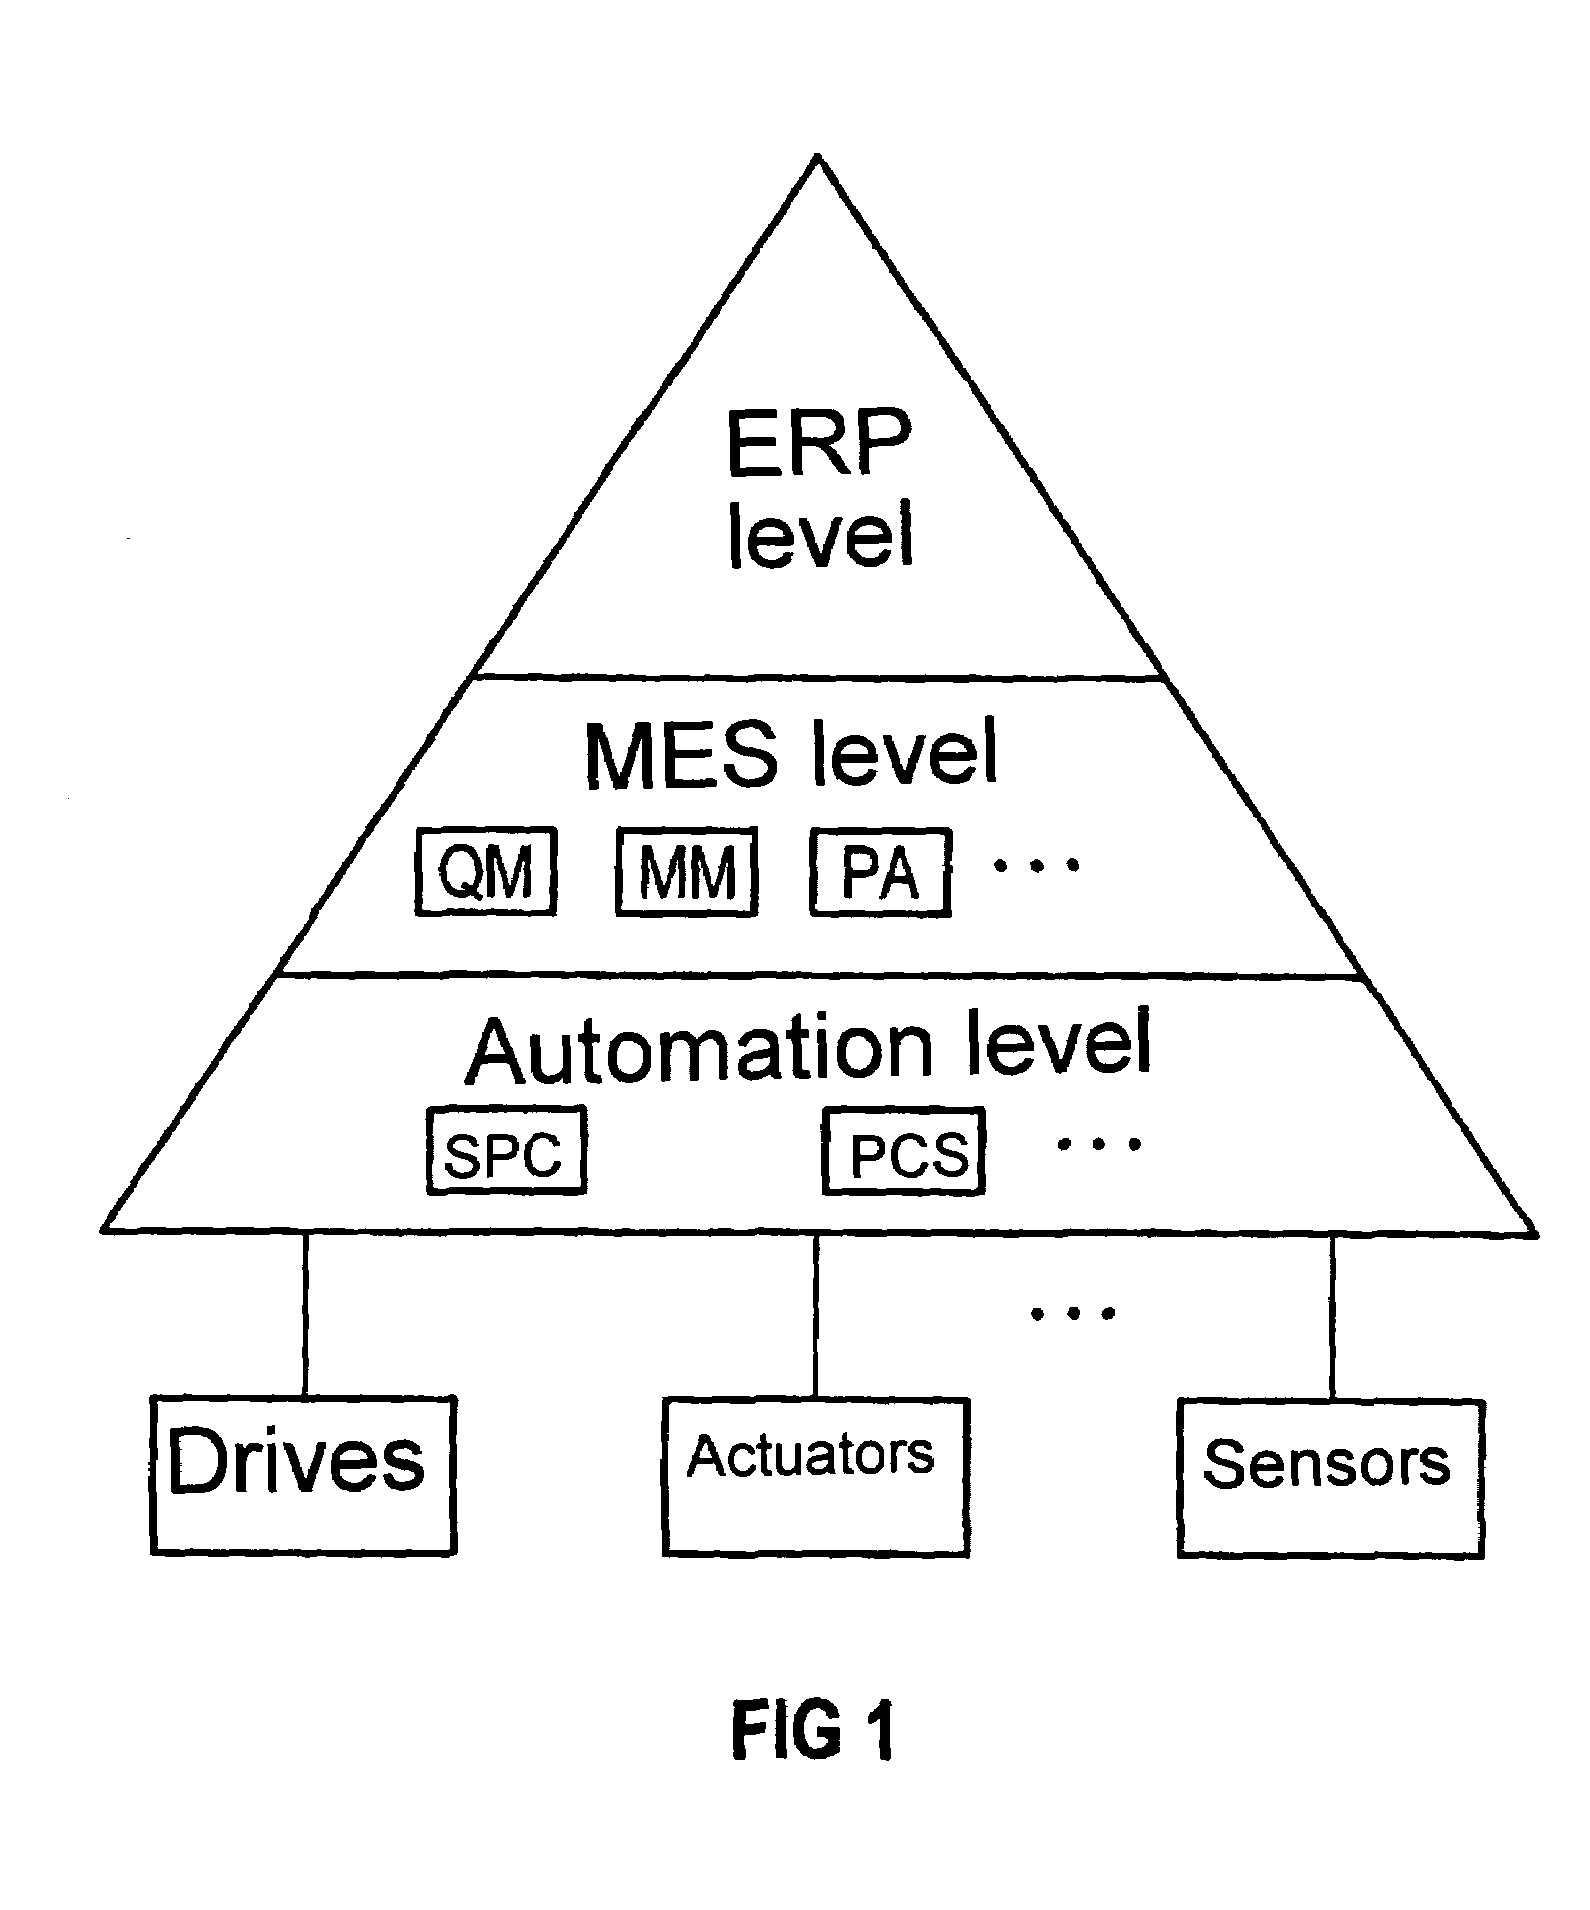 System and method for communicating between software applications, particularly MES (manufacturing execution system) applications